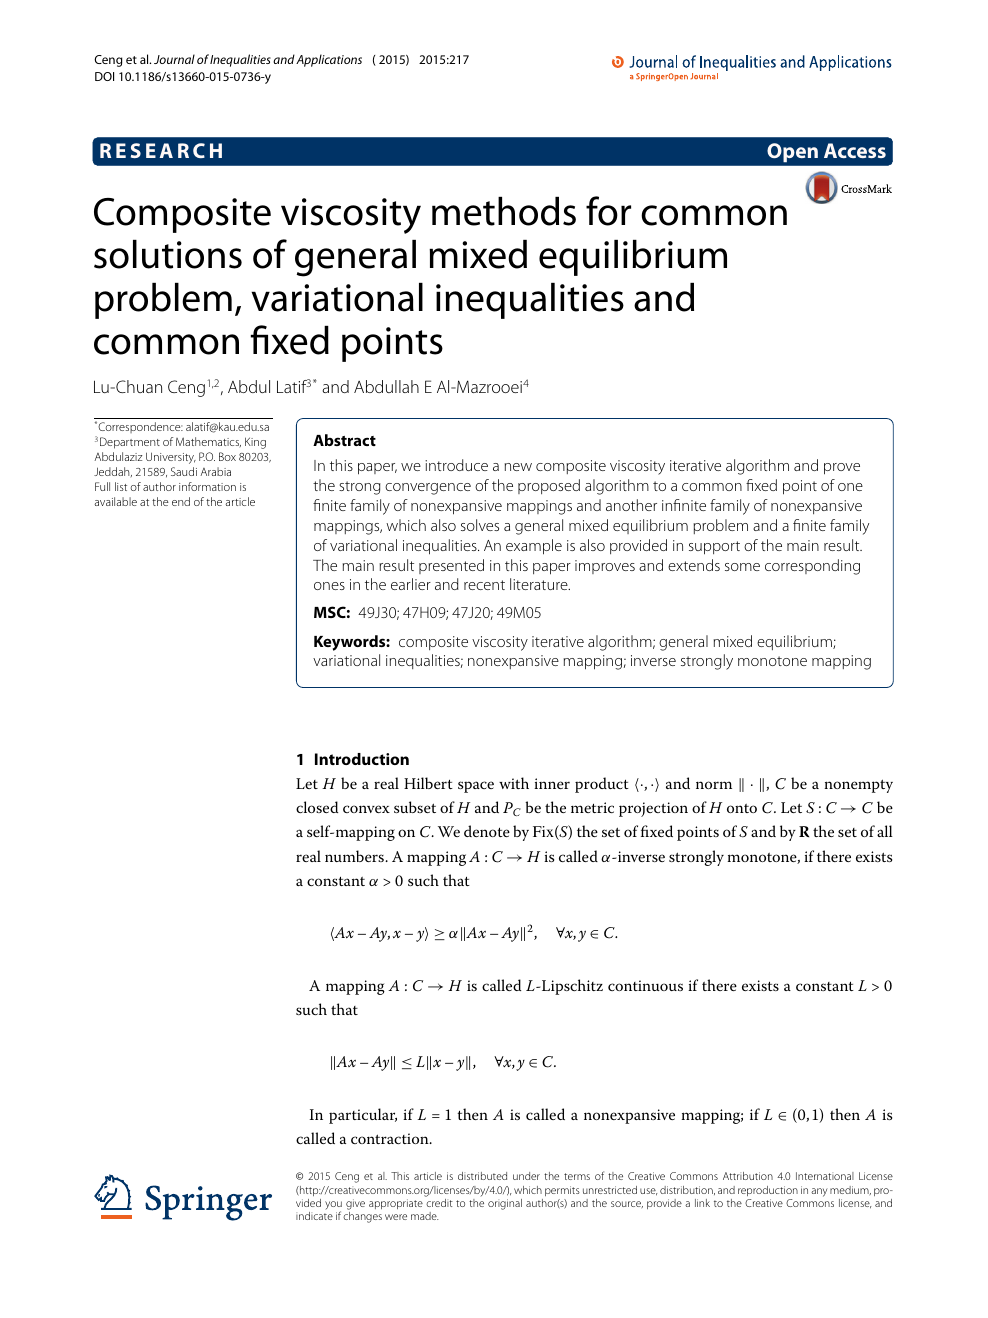 Composite Viscosity Methods For Common Solutions Of General Mixed Equilibrium Problem Variational Inequalities And Common Fixed Points Topic Of Research Paper In Mathematics Download Scholarly Article Pdf And Read For Free